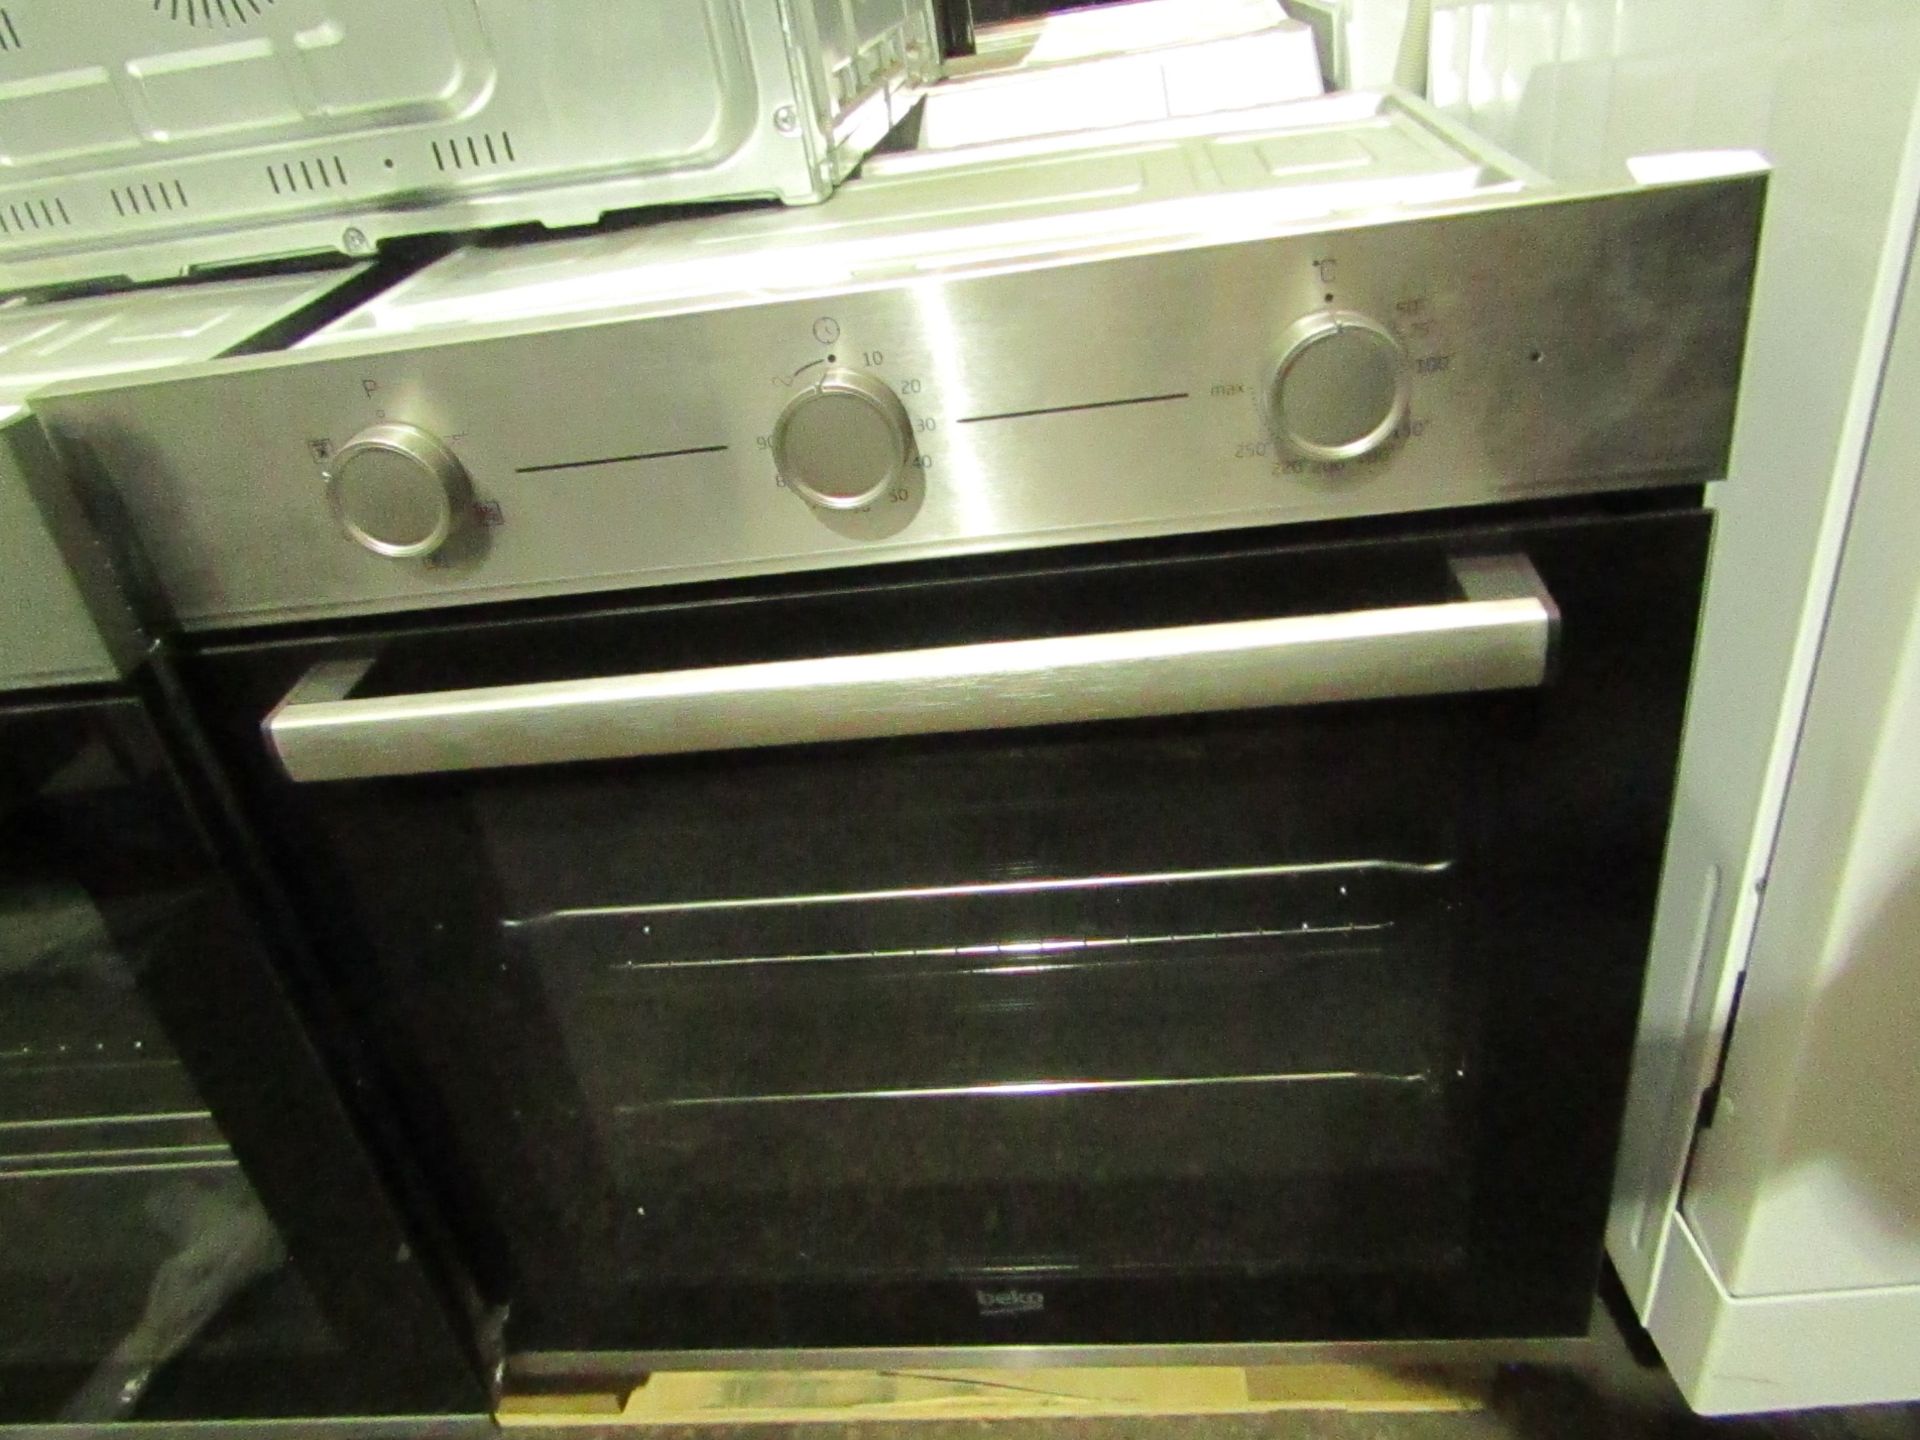 BEKO Single Electric Integrated Oven Stainless Steel BBIF22100X RRP “?205.00 - This item looks to be